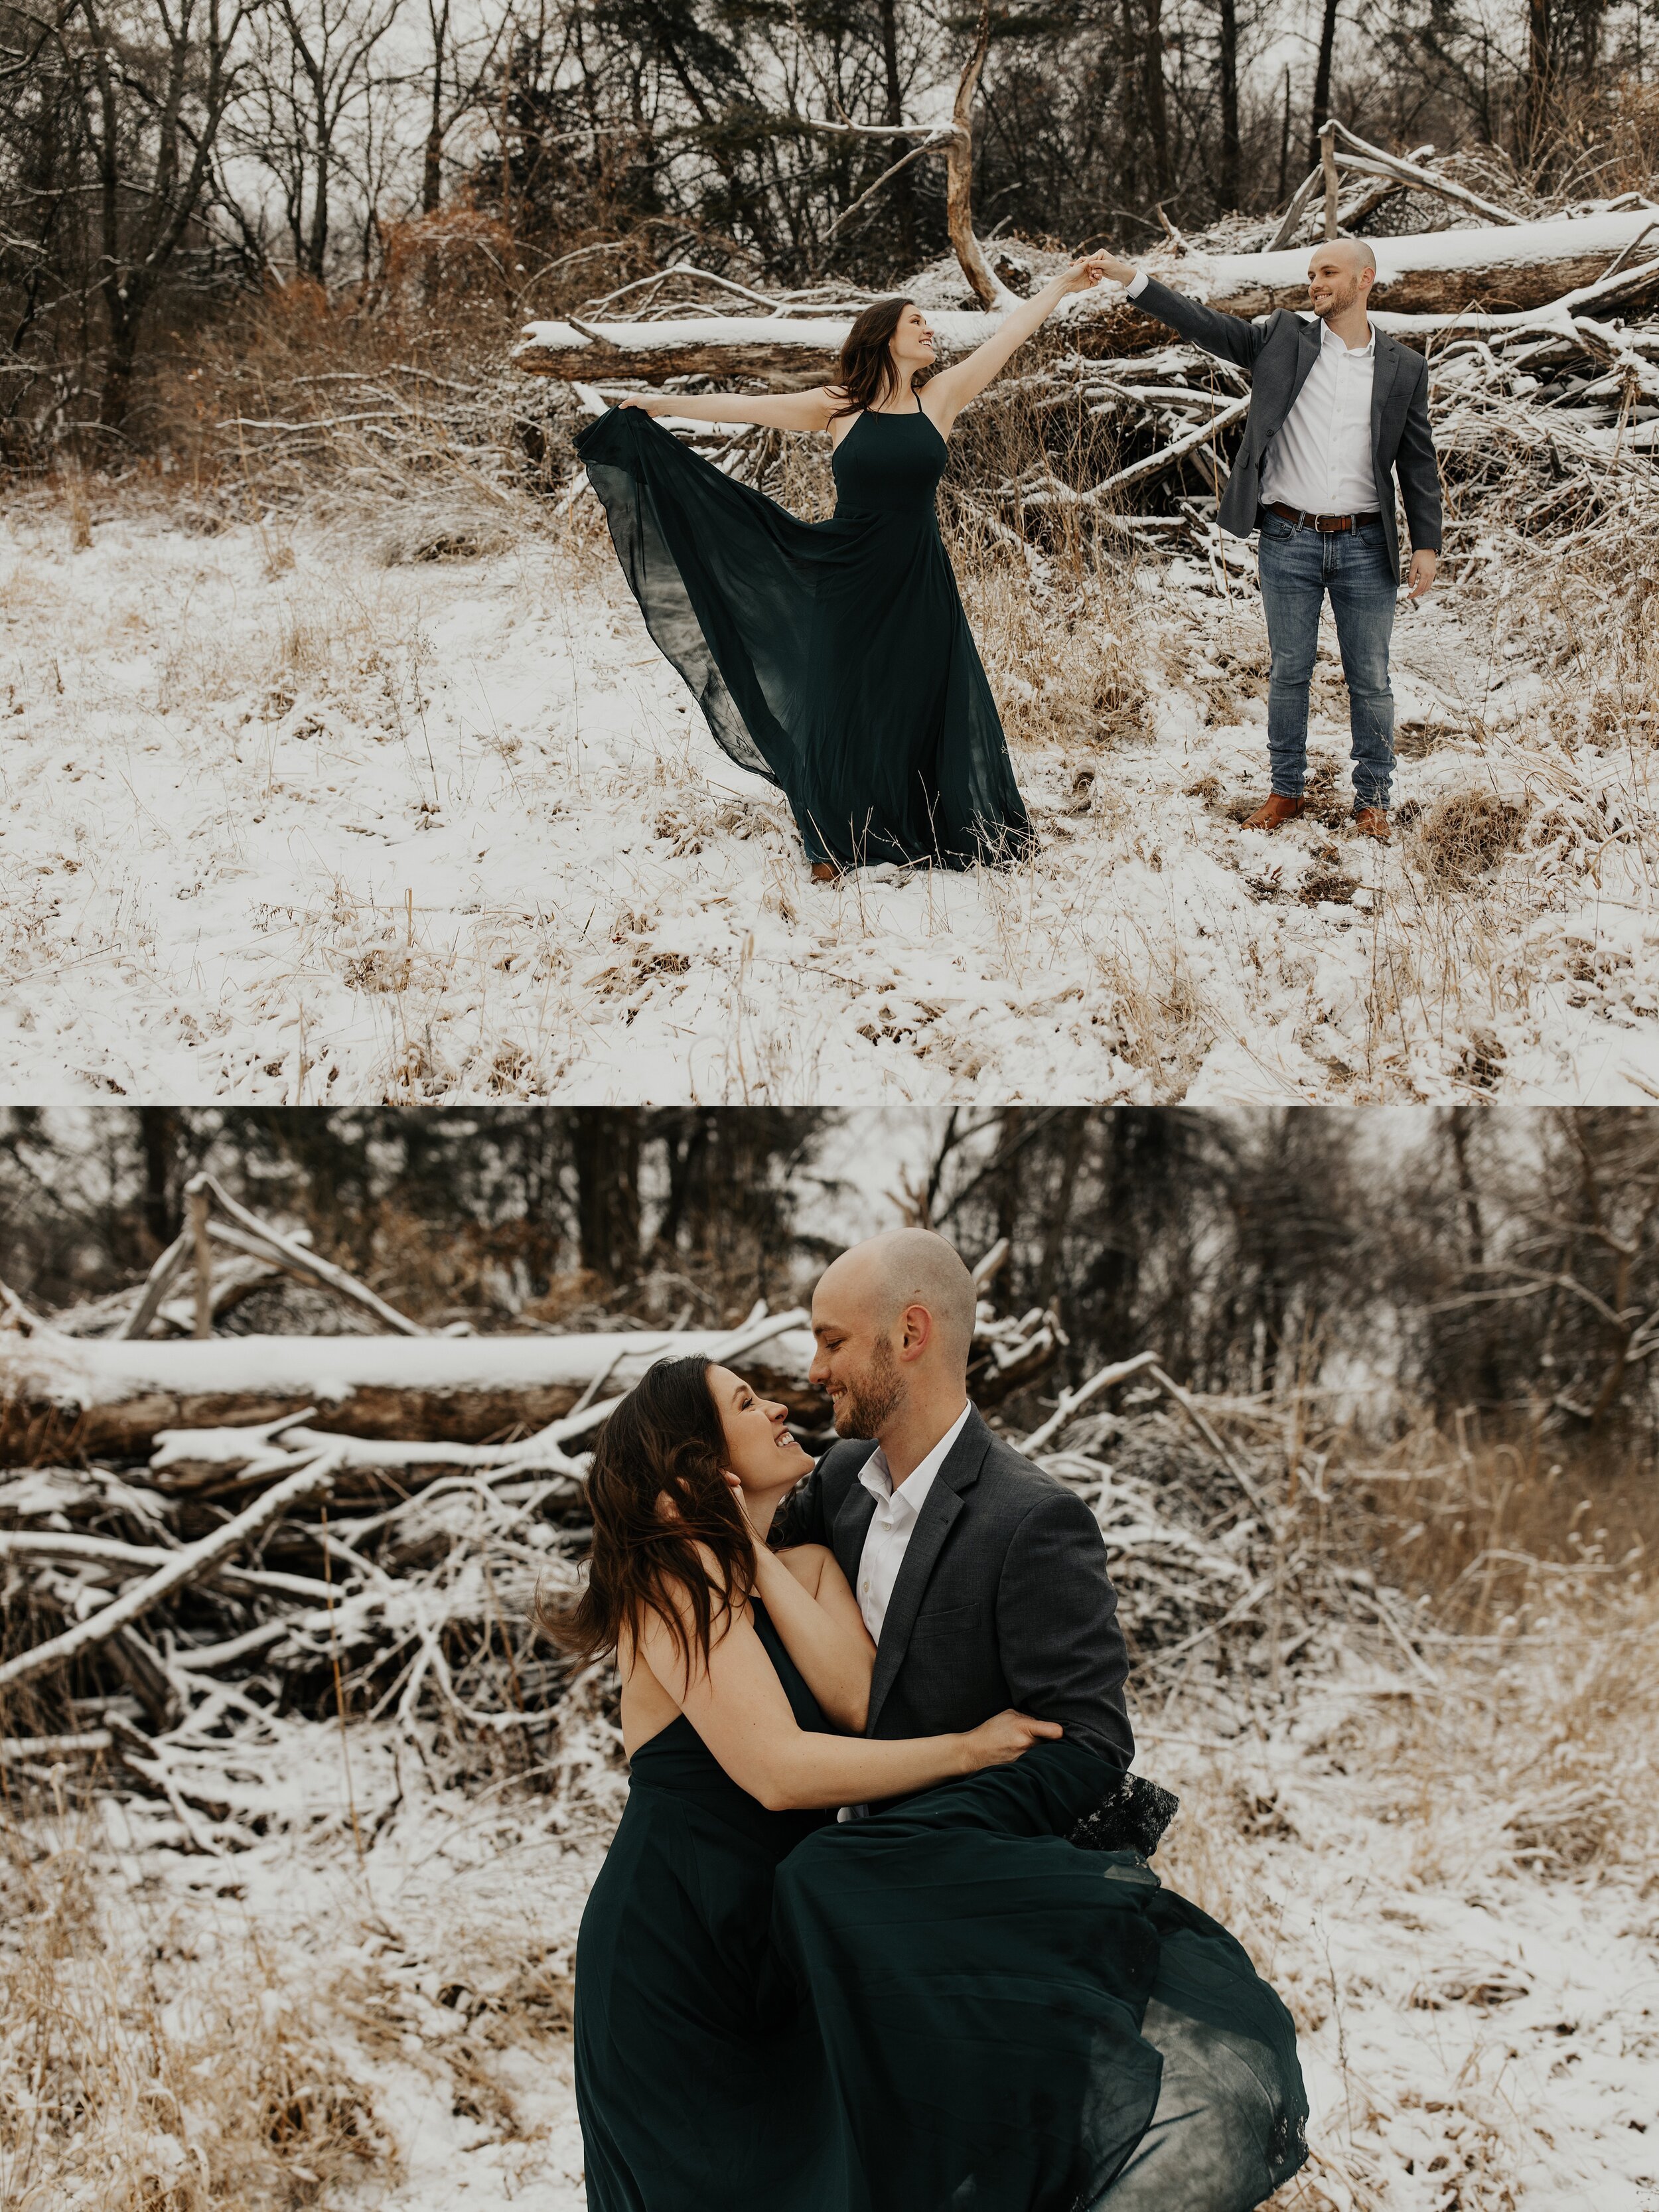 jessika-christine-photography-outdoor-engagement-couples-snow-adventurous-session (3).jpg